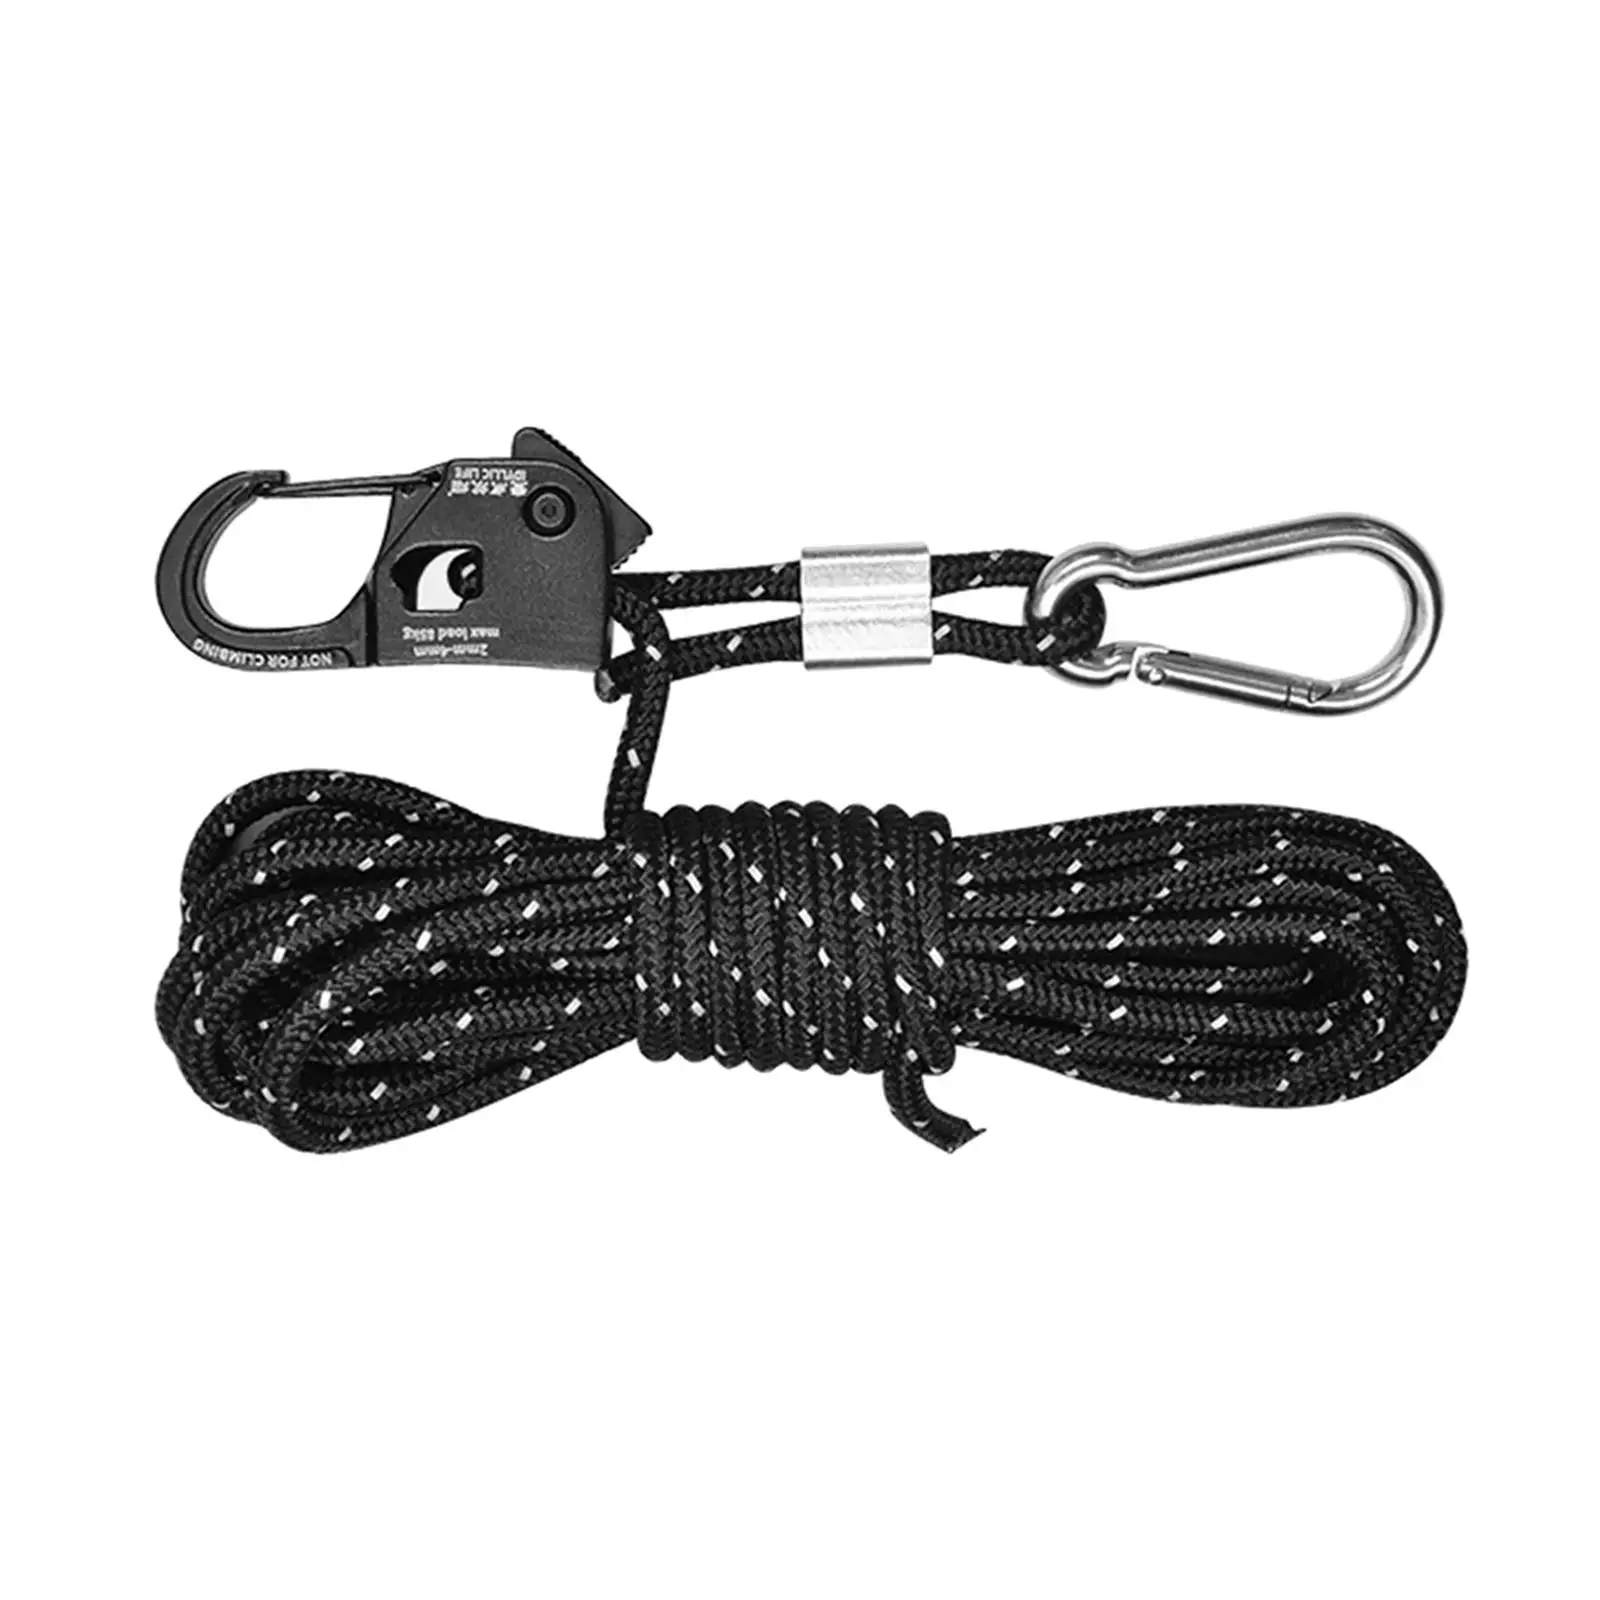 4mm Tent Guy Rope with Self-Locking Adjuster, Sturdy and Durable, 13ft Length,